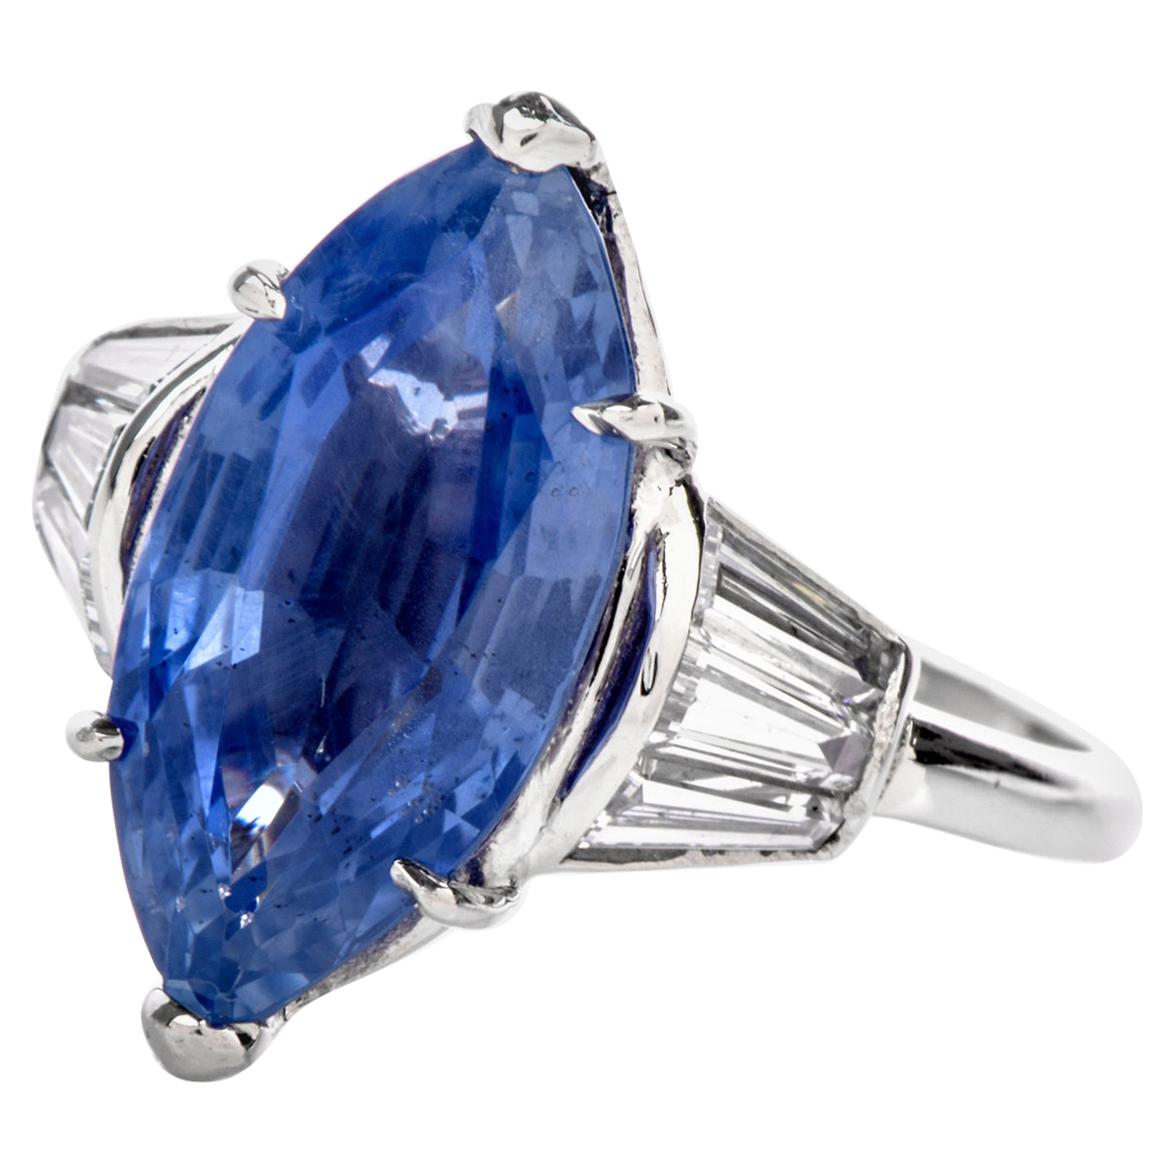 This lovely marquise design is crafted in solid Platinum. Centered with a dazzling 6.58-carat natural no-heat Burma Sapphire, prong set. It is adorned to the sides with 6 genuine tapered baguette cut Diamonds of an approximate carat weight of 0.75